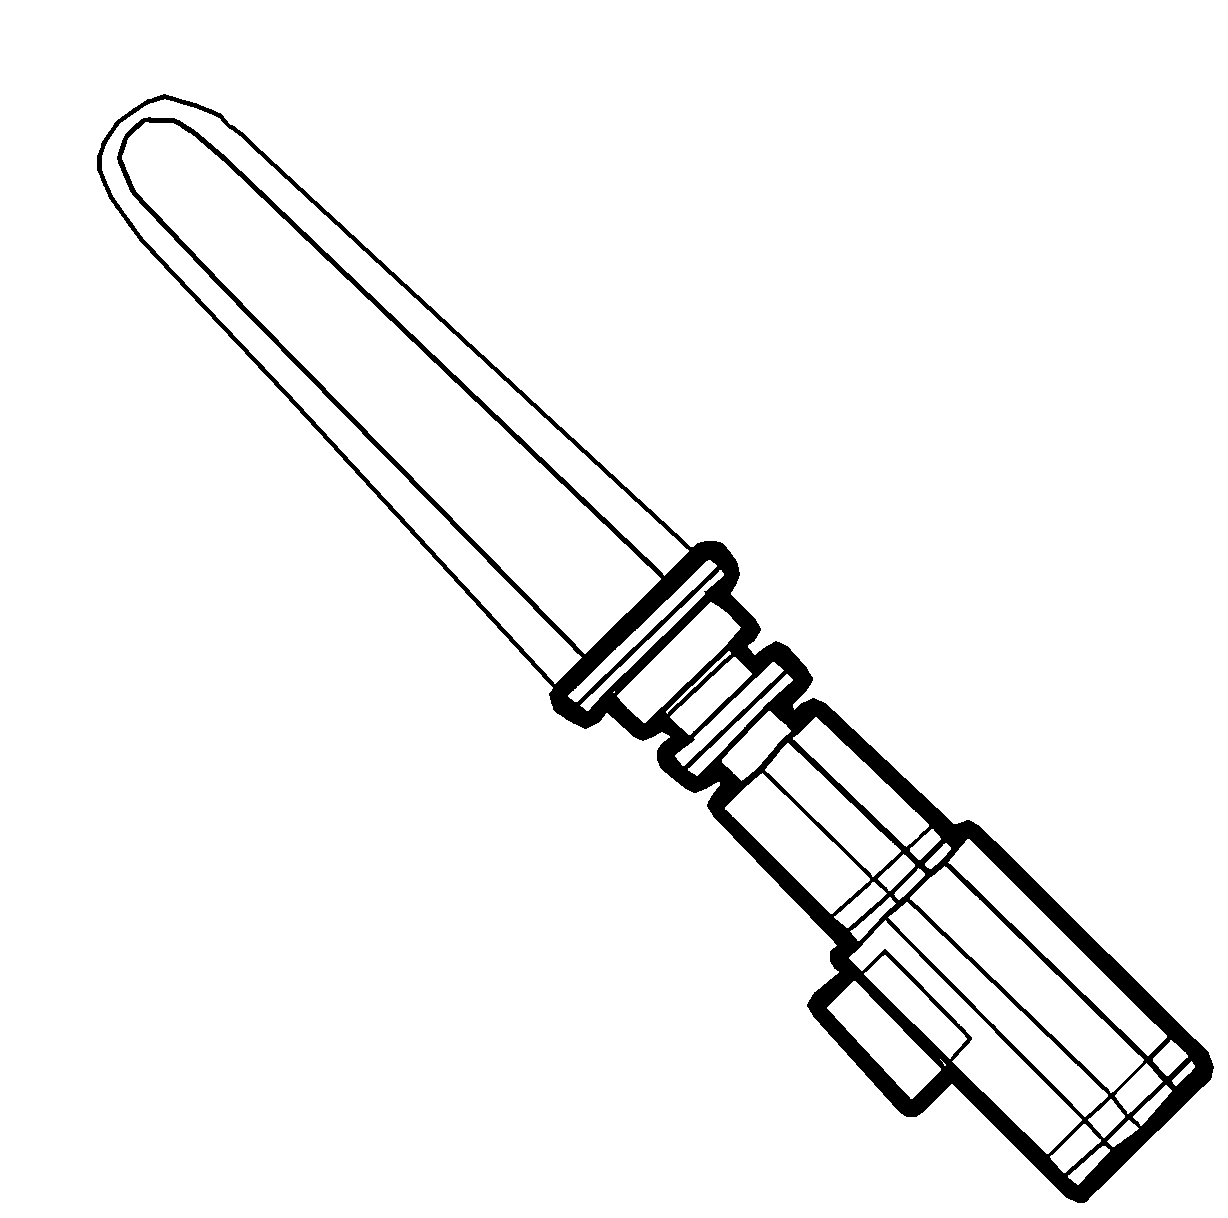 lightsaber-coloring-page